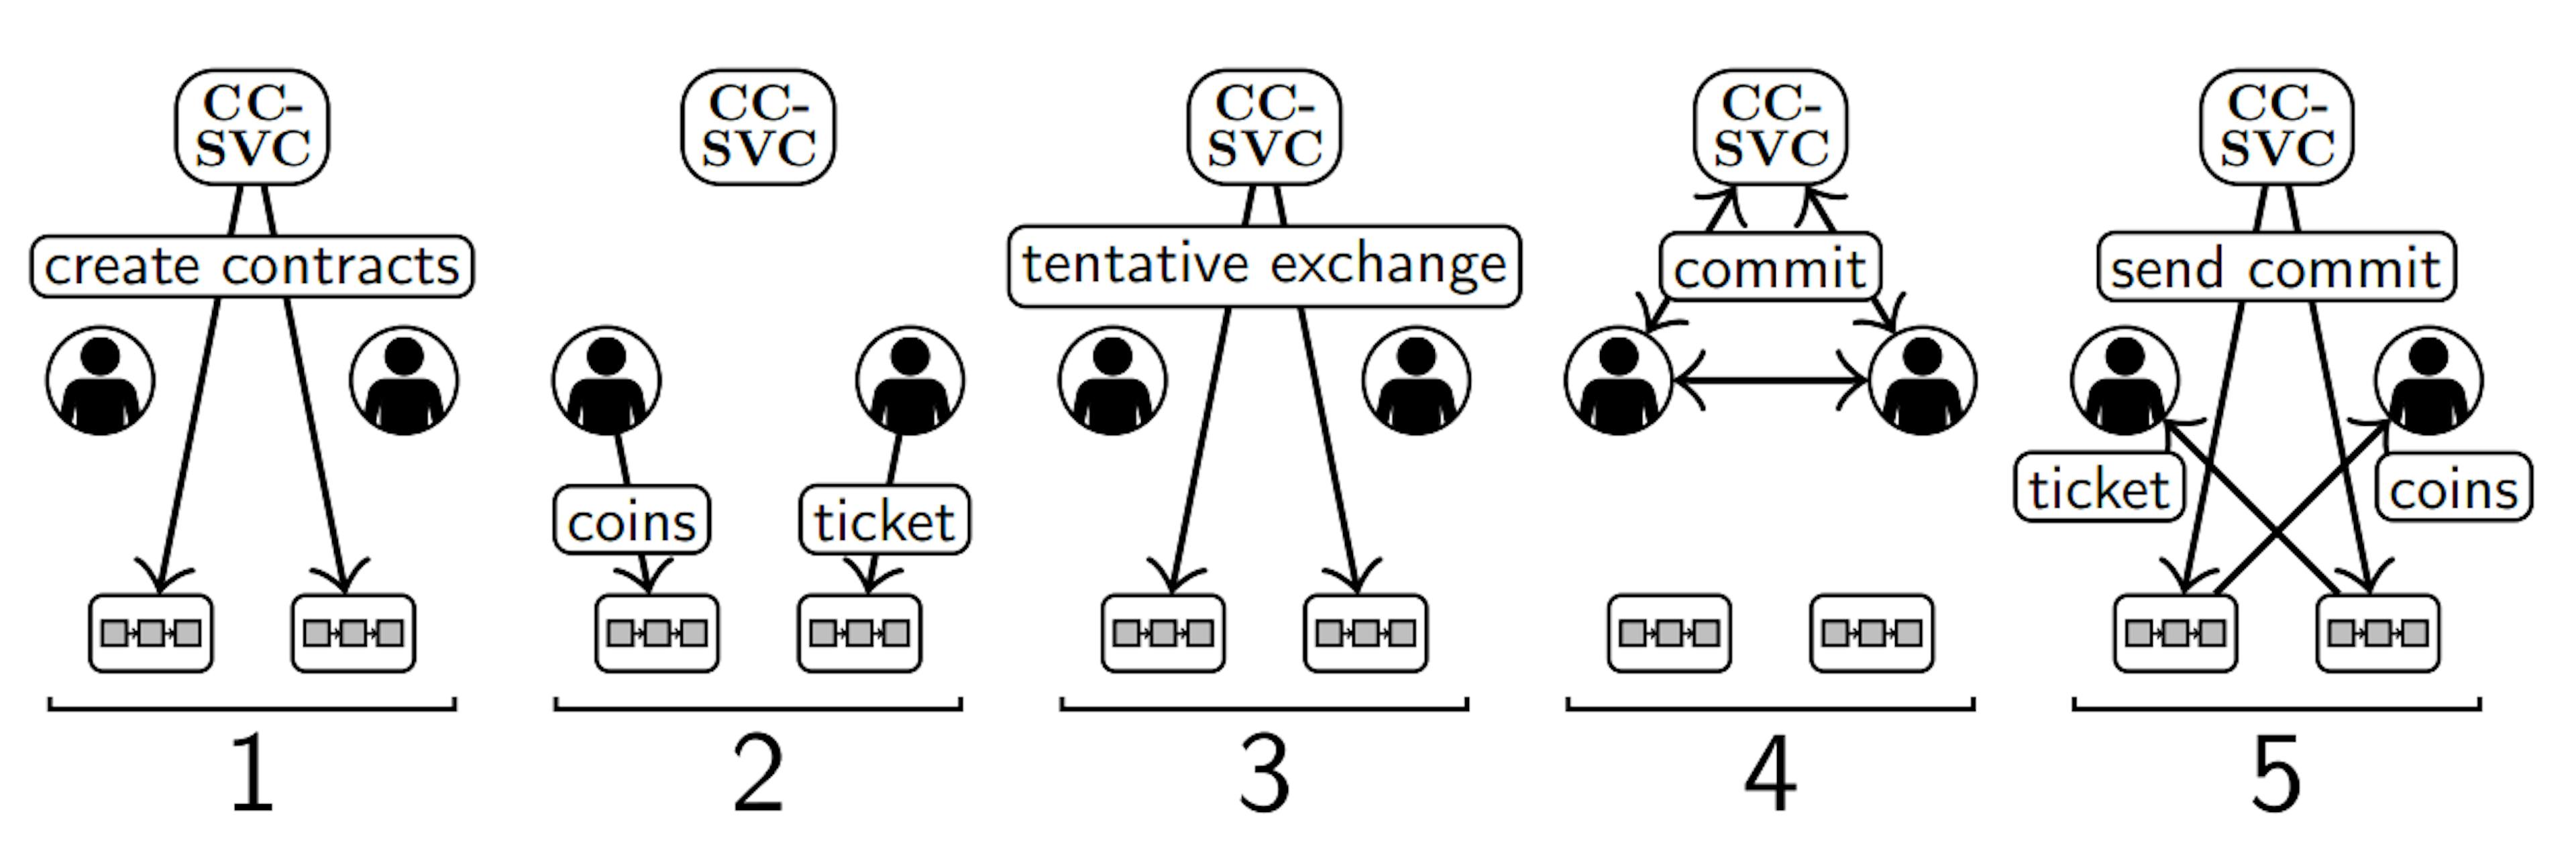 Fig. 2. Illustration of the five steps of Section II-B in a setting with one CC-SVC (top), two users (middle), and two blockchains (bottom). The Kafka network is not shown.